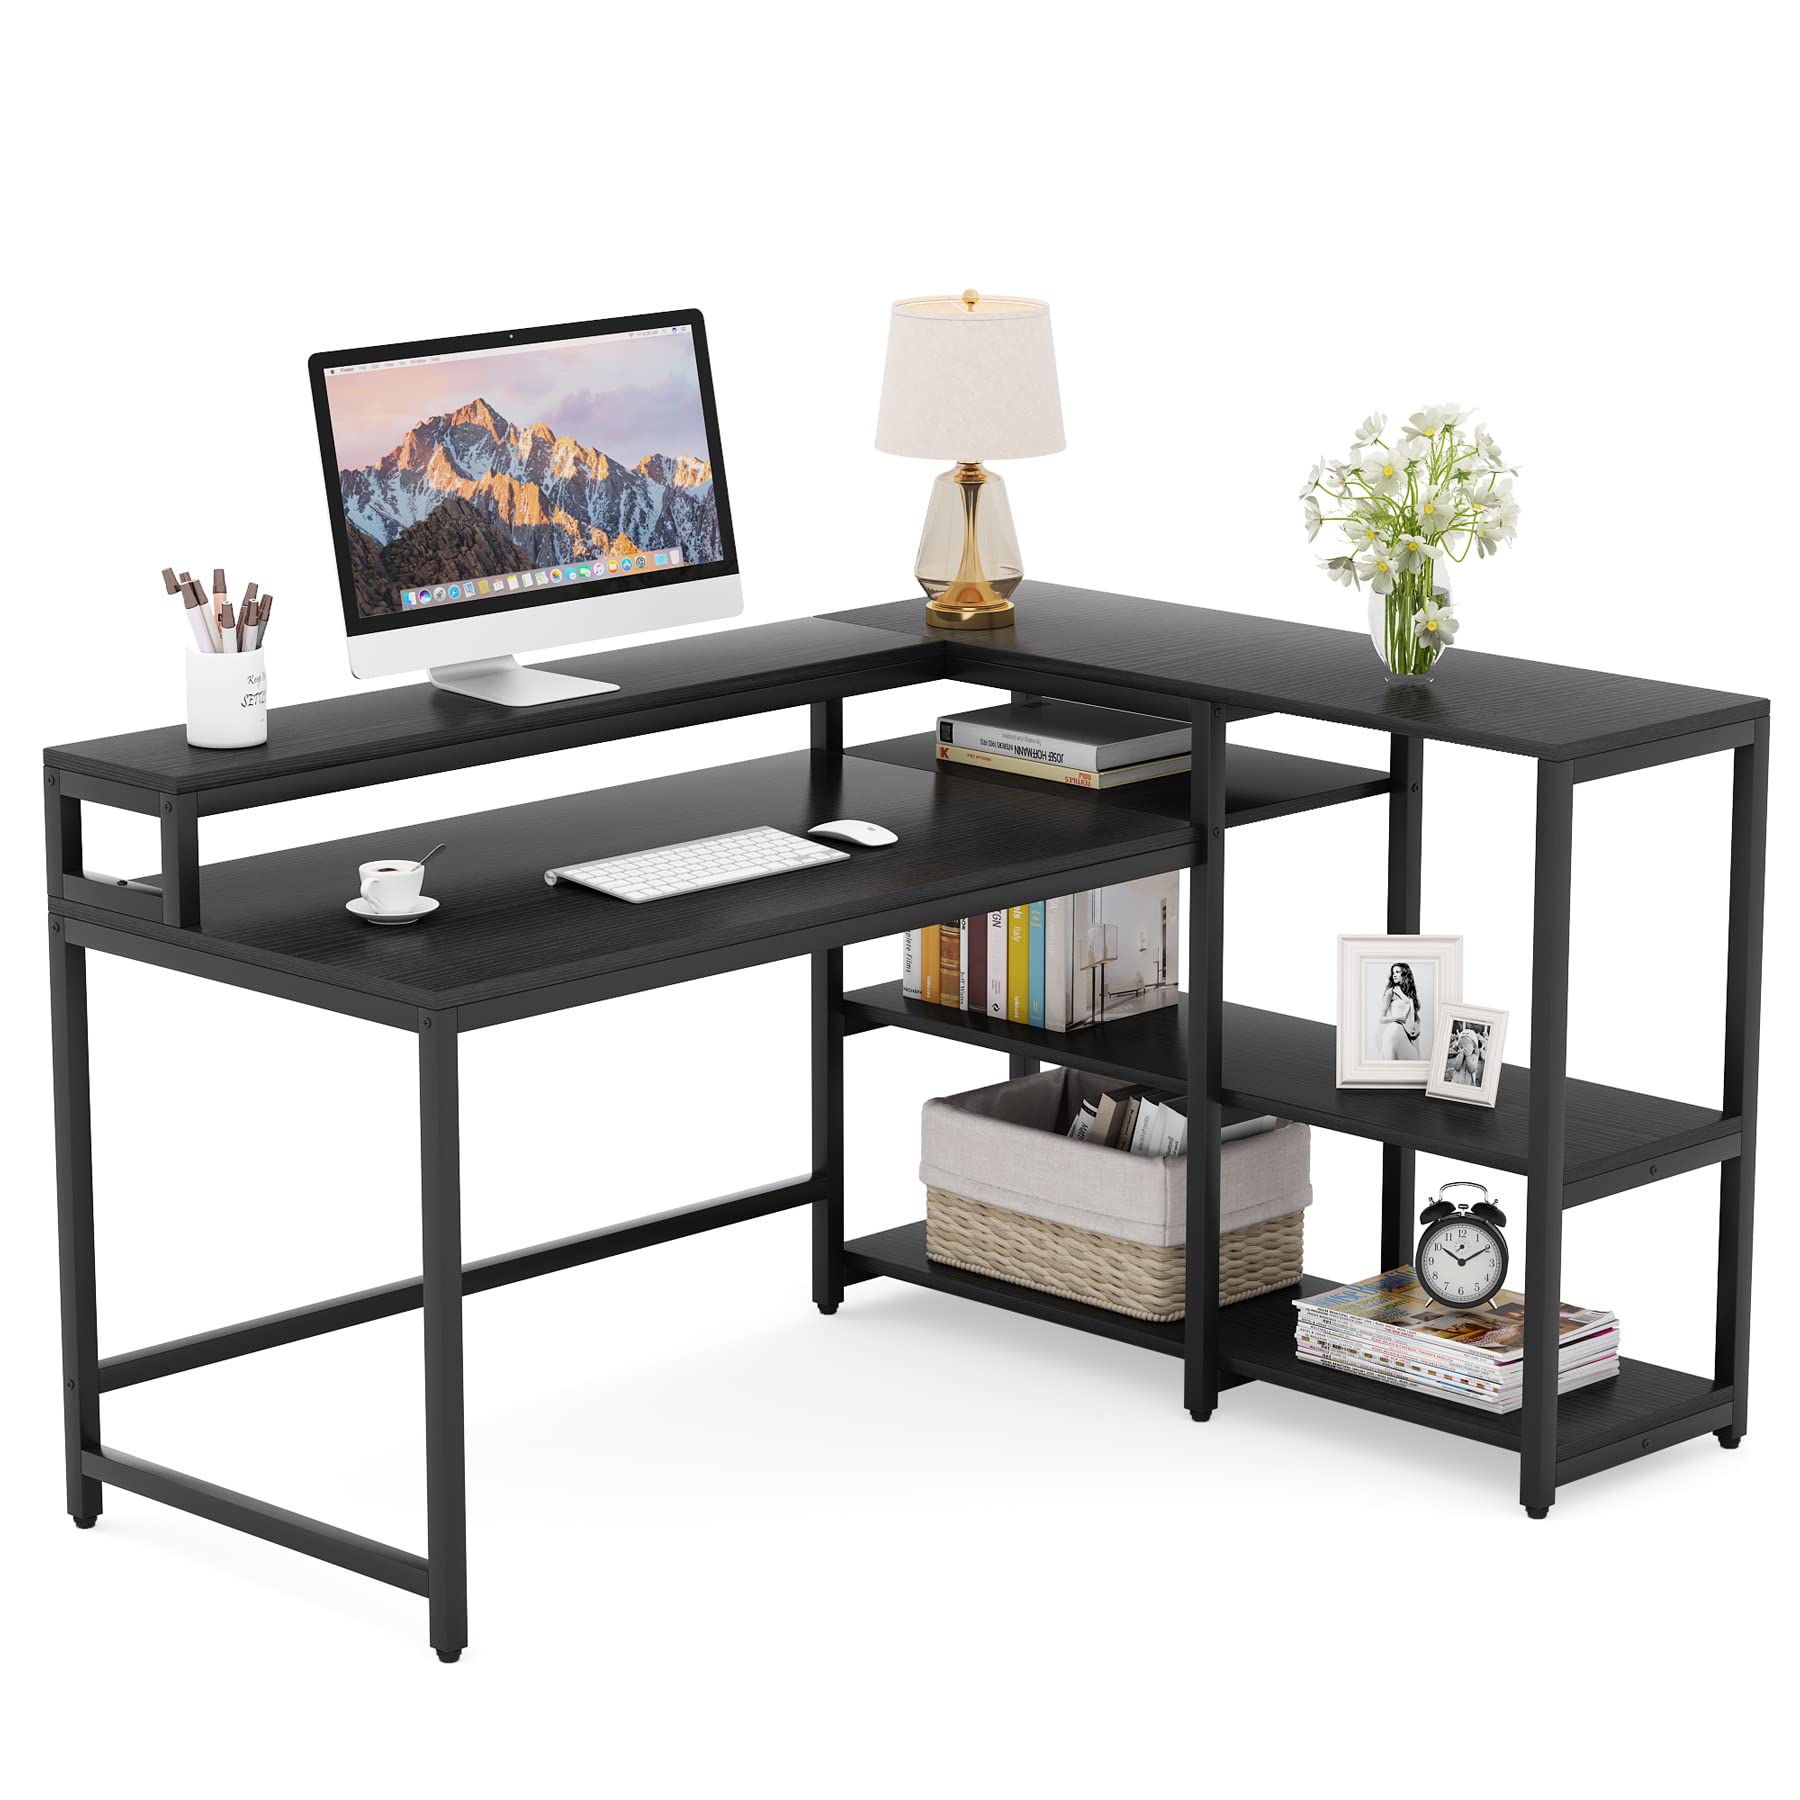 Tribesigns Reversible L Shaped Computer Desk with Storage Shelf, Industrial 55 Inch Corner Desk with Shelves and Monitor Stand, Study Writing Table for Home Office